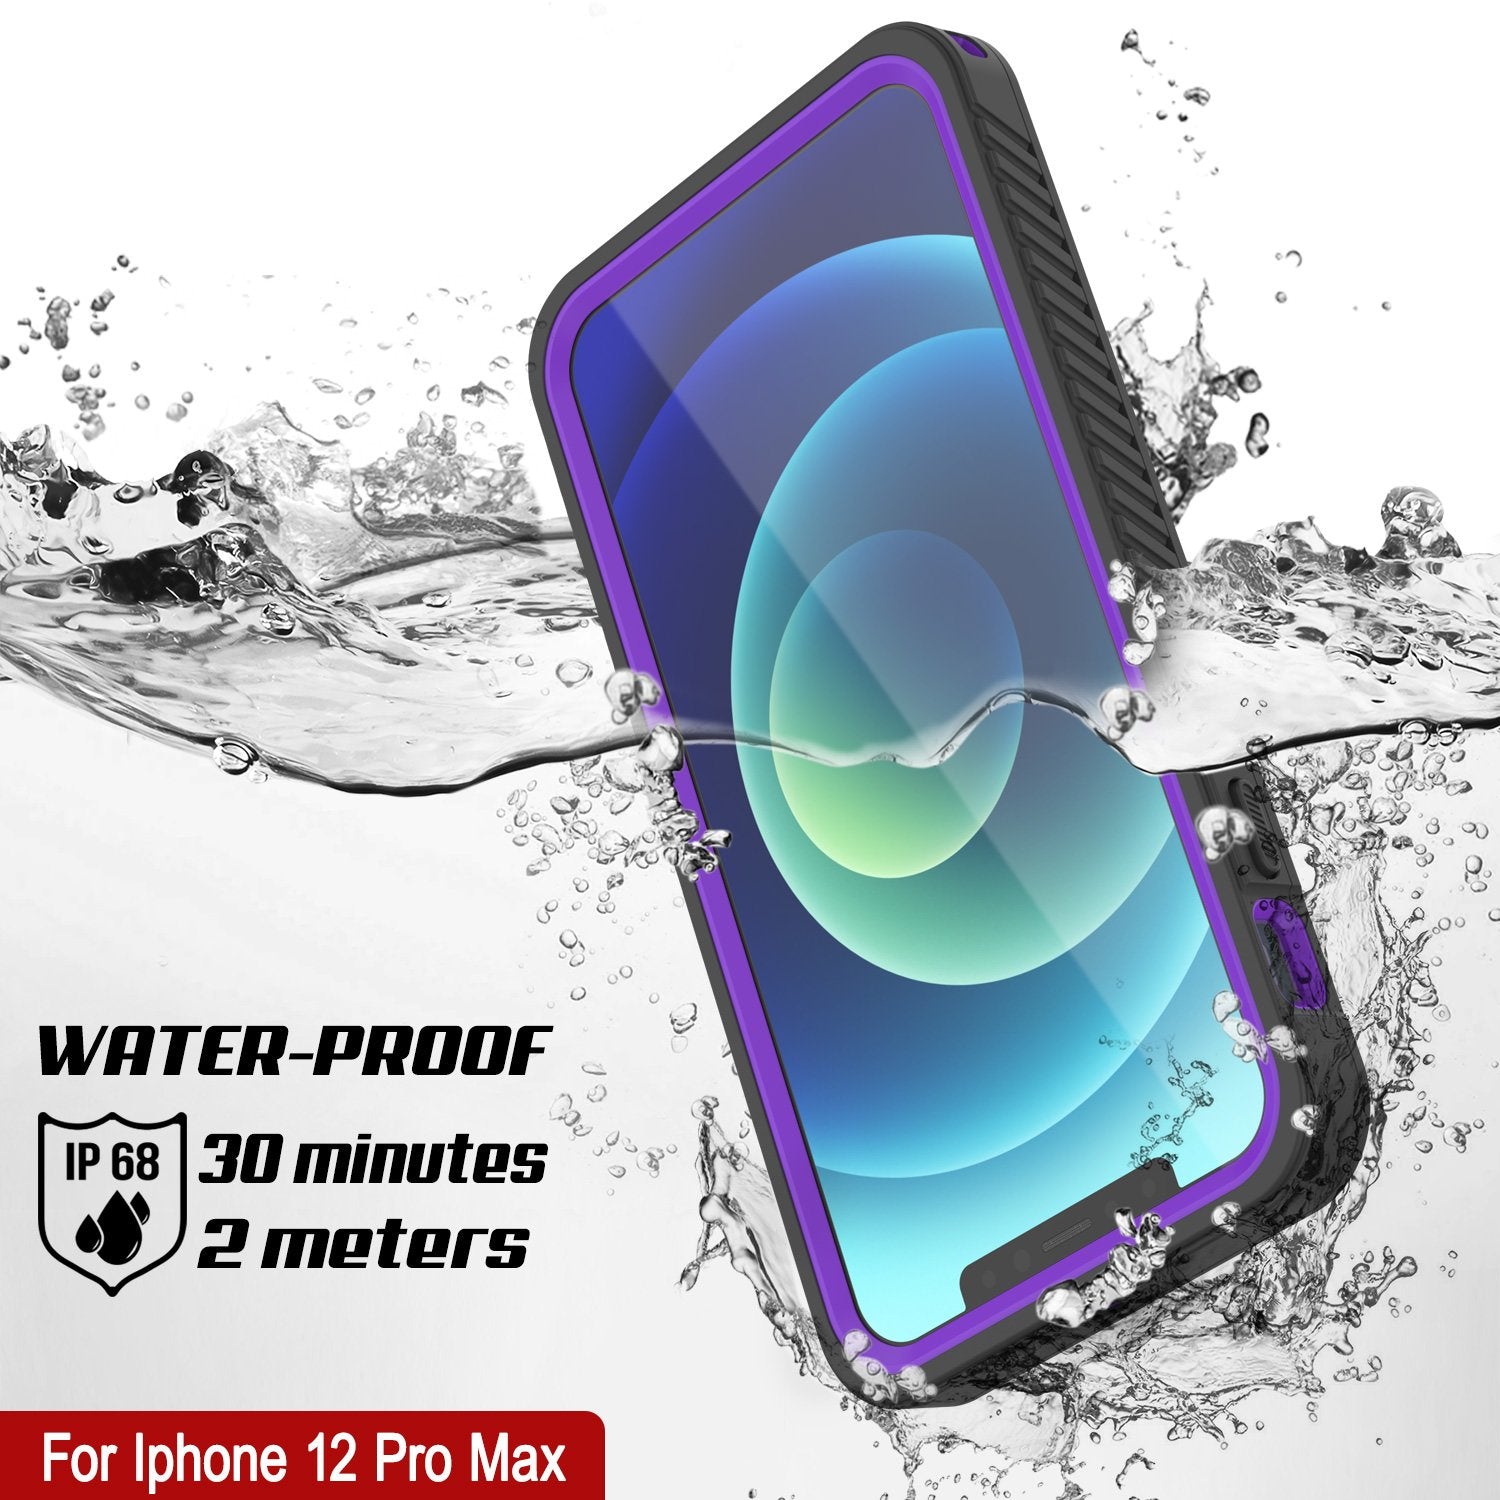 iPhone 12 Pro Max Waterproof Case, Punkcase [Extreme Series] Armor Cover W/ Built In Screen Protector [Purple]